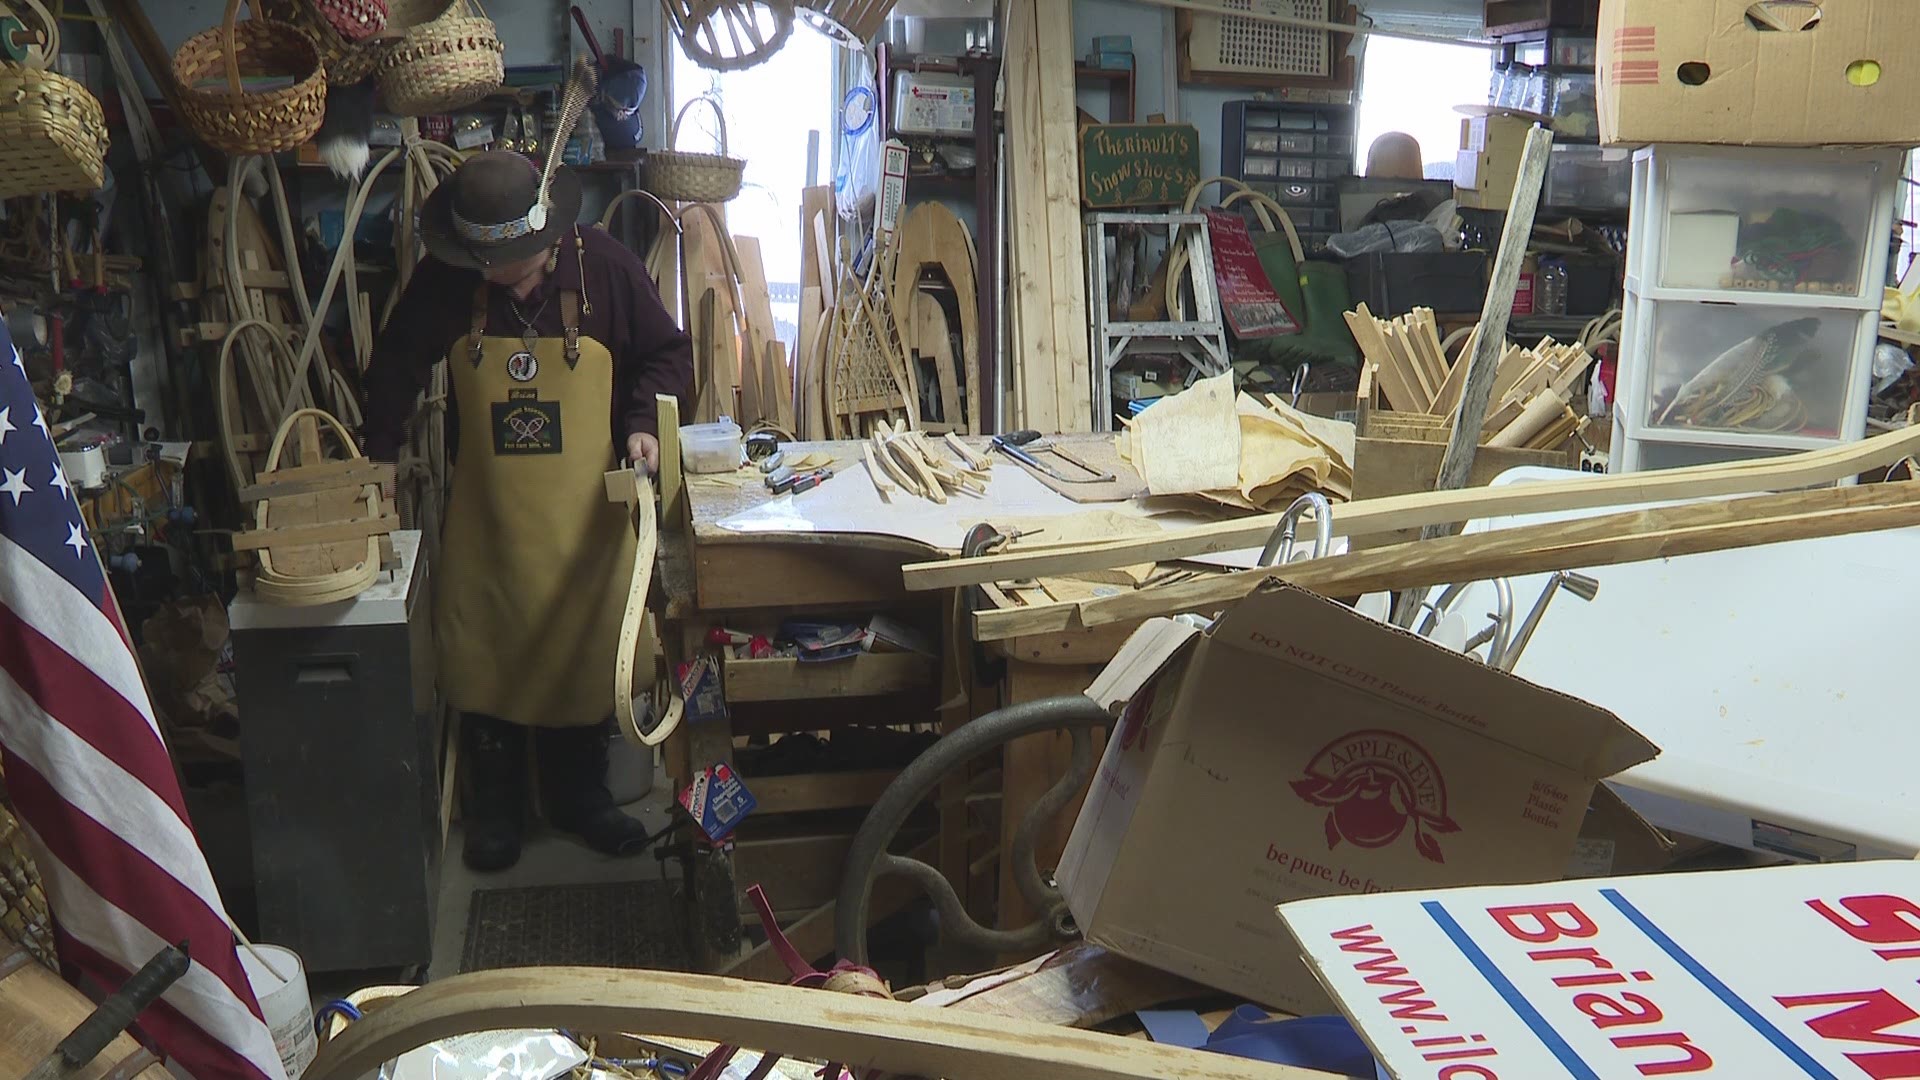 Brian Theriault and his father, Edmond, have been selling wooden snowshoes for 25 years. The two started crafting with cowhide and brown ash 50 years ago.